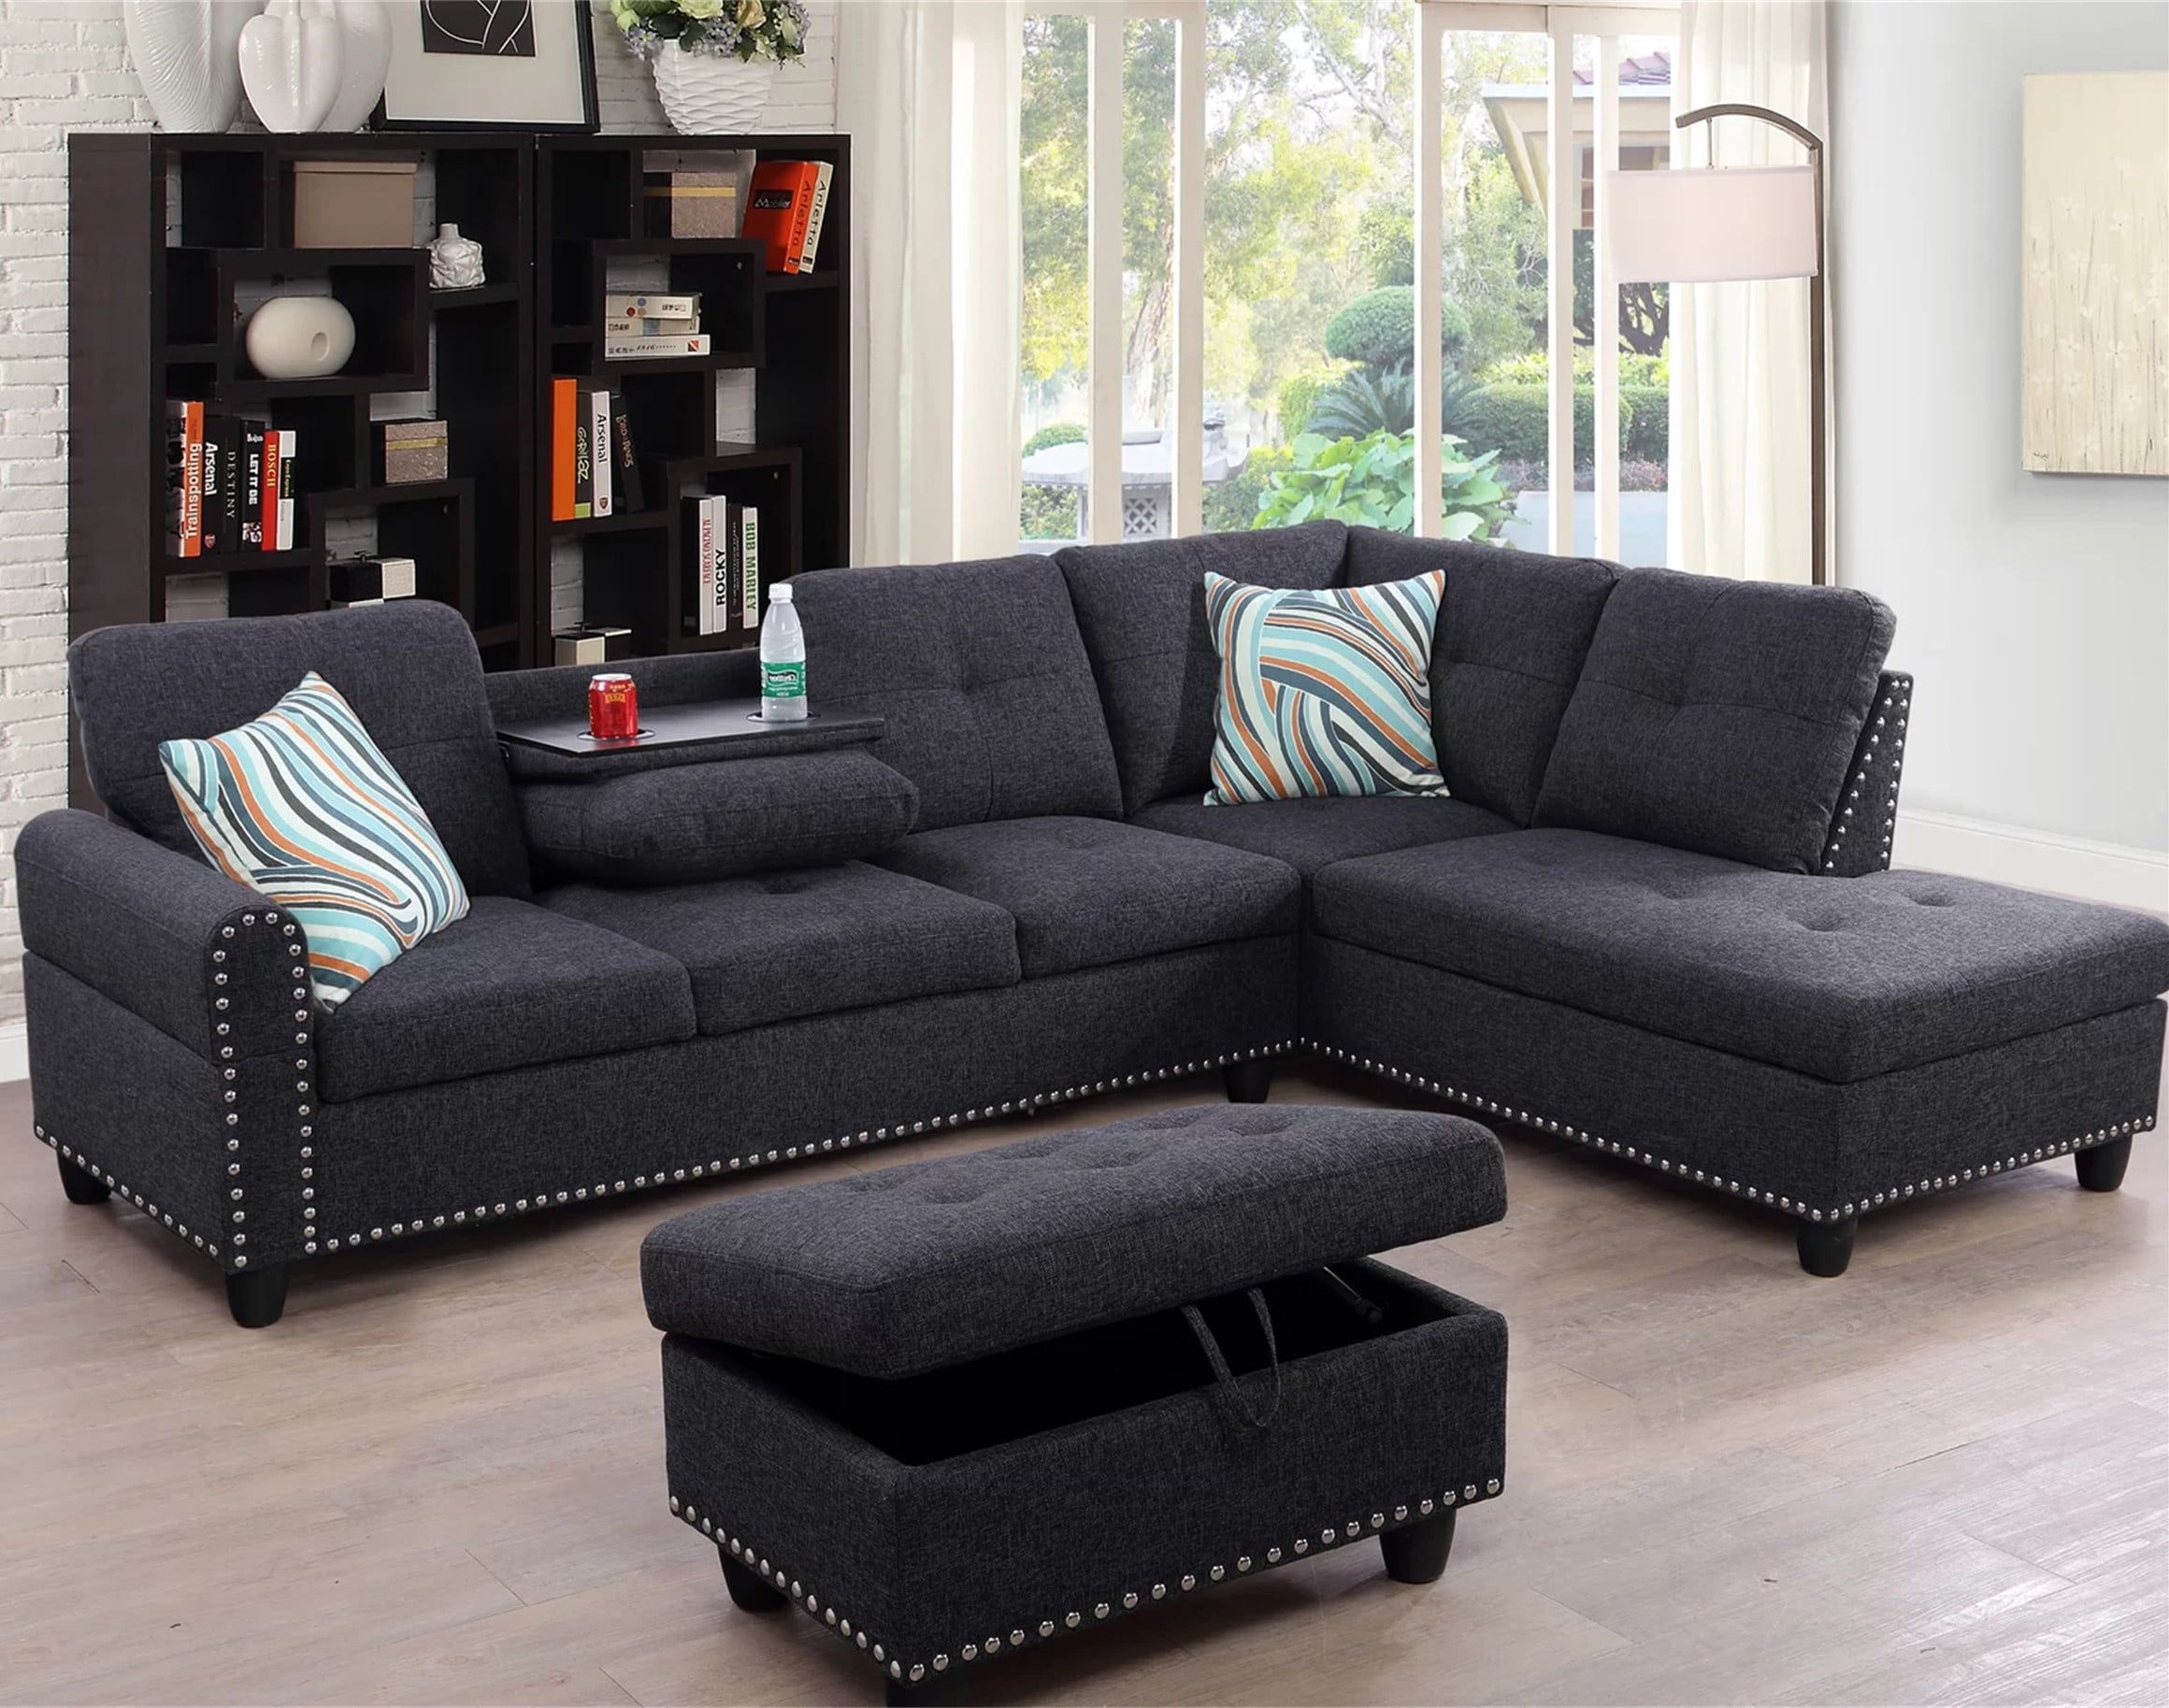 Aukfa Modern Linen Sectional Sofa  Right Facing Chaise  Ottoman  Metal  Nails Decor  Living Room Furniture Set  Black – Walmart Intended For Right Facing Black Sofas (View 8 of 15)